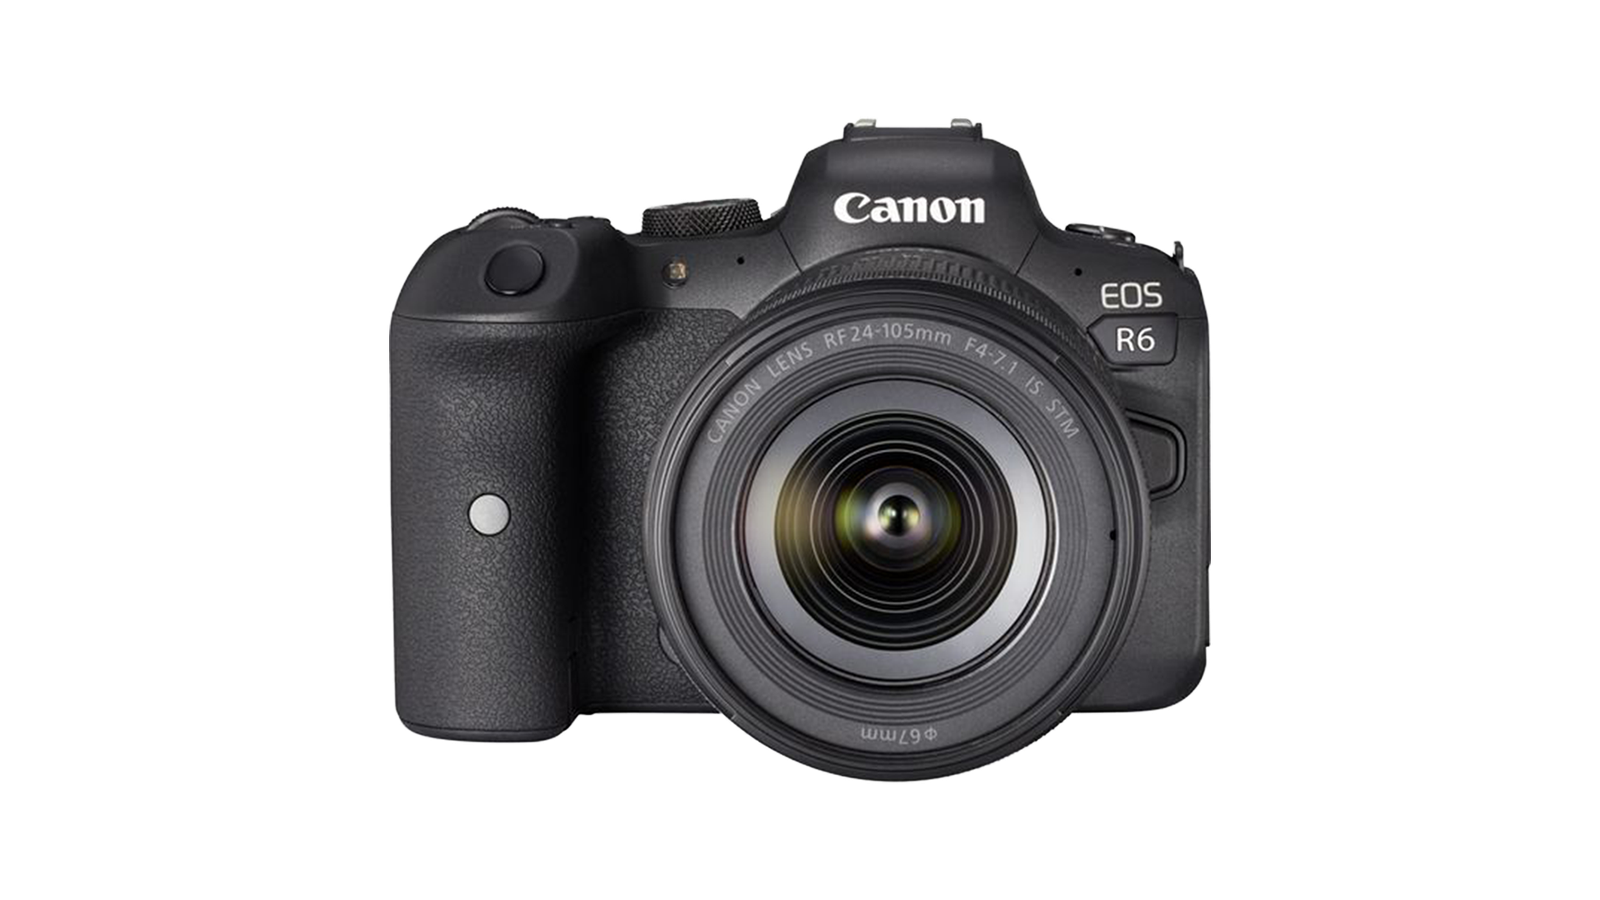 Canon EOS R5 - The most expensive option and one of the best cameras overall